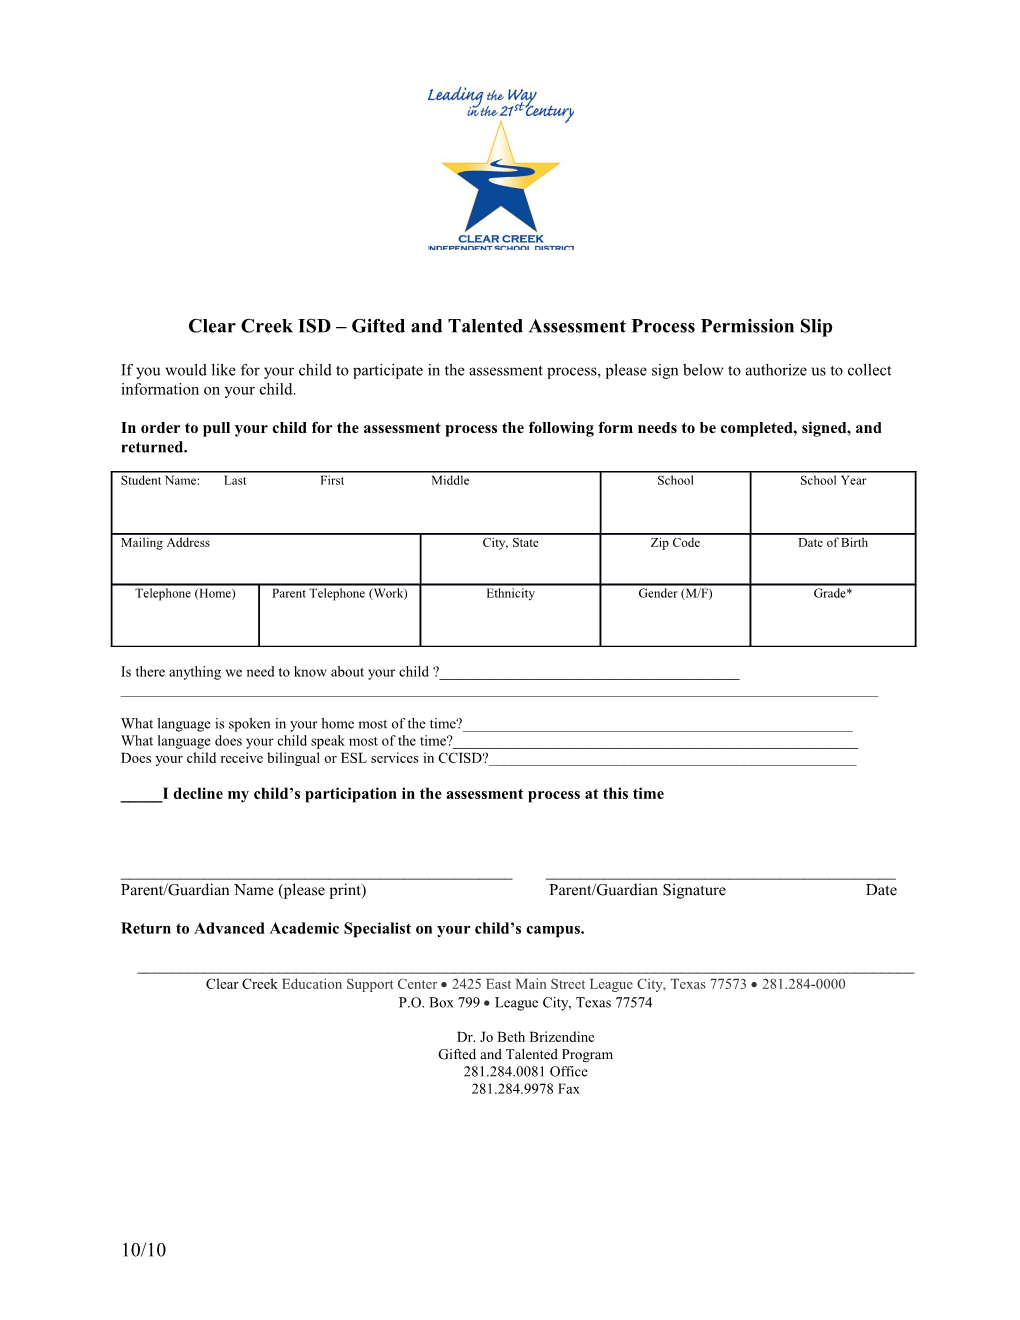 Clear Creek ISD Gifted and Talented Program Permission Slip